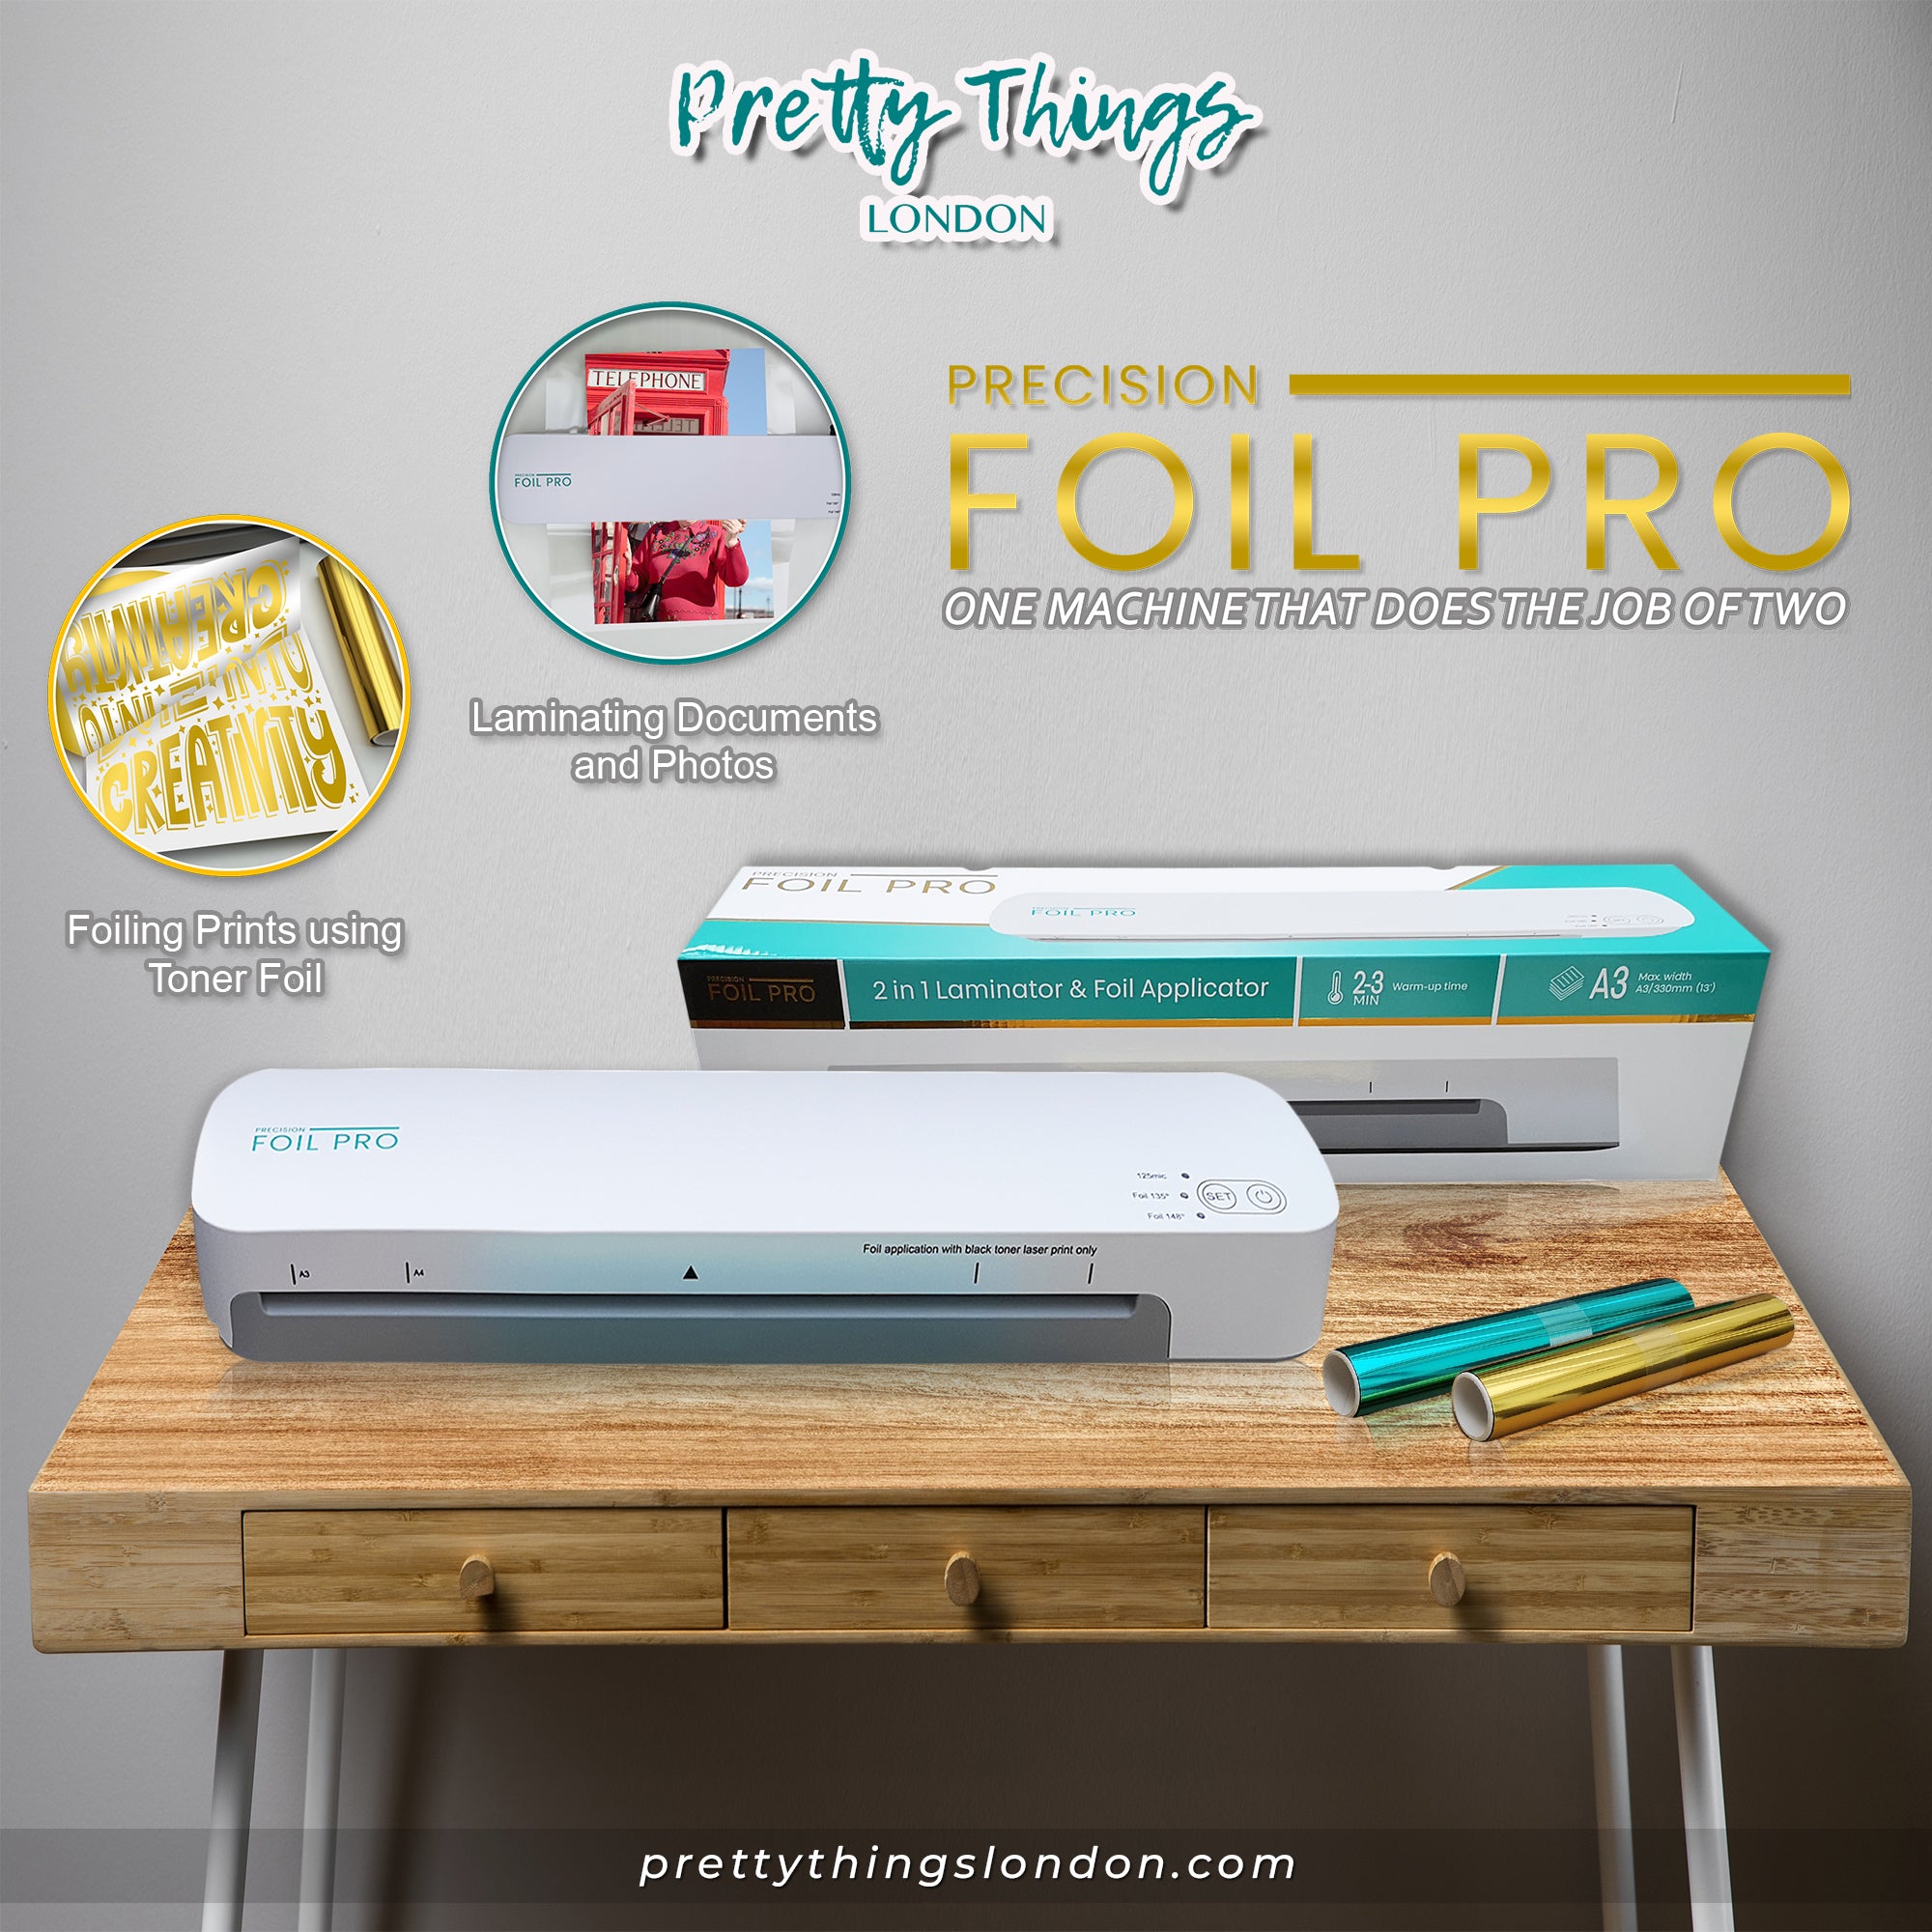 How To Use Precision Foil Pro by Pretty Things London